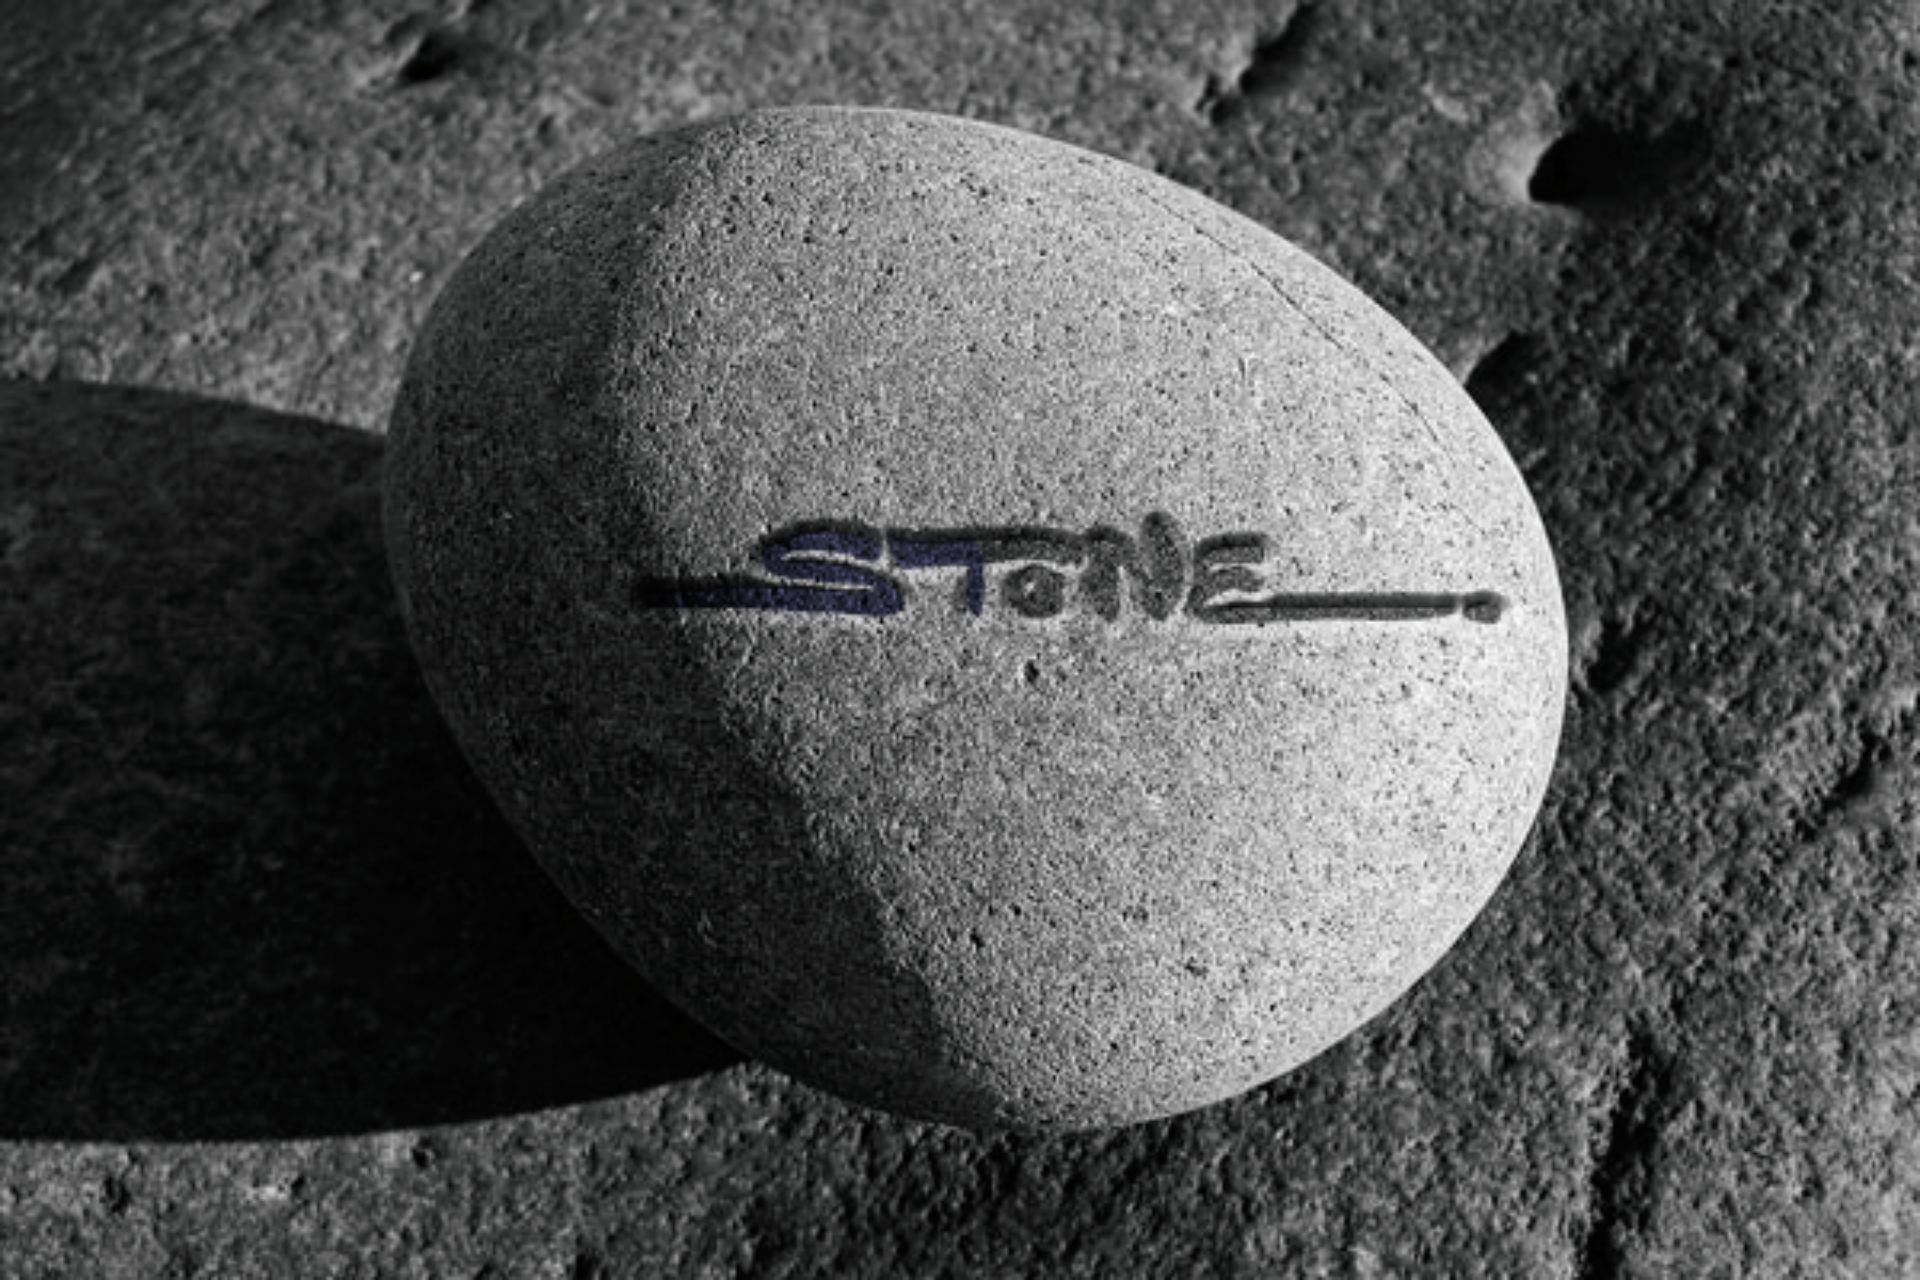 STONE PRODUCTIONS